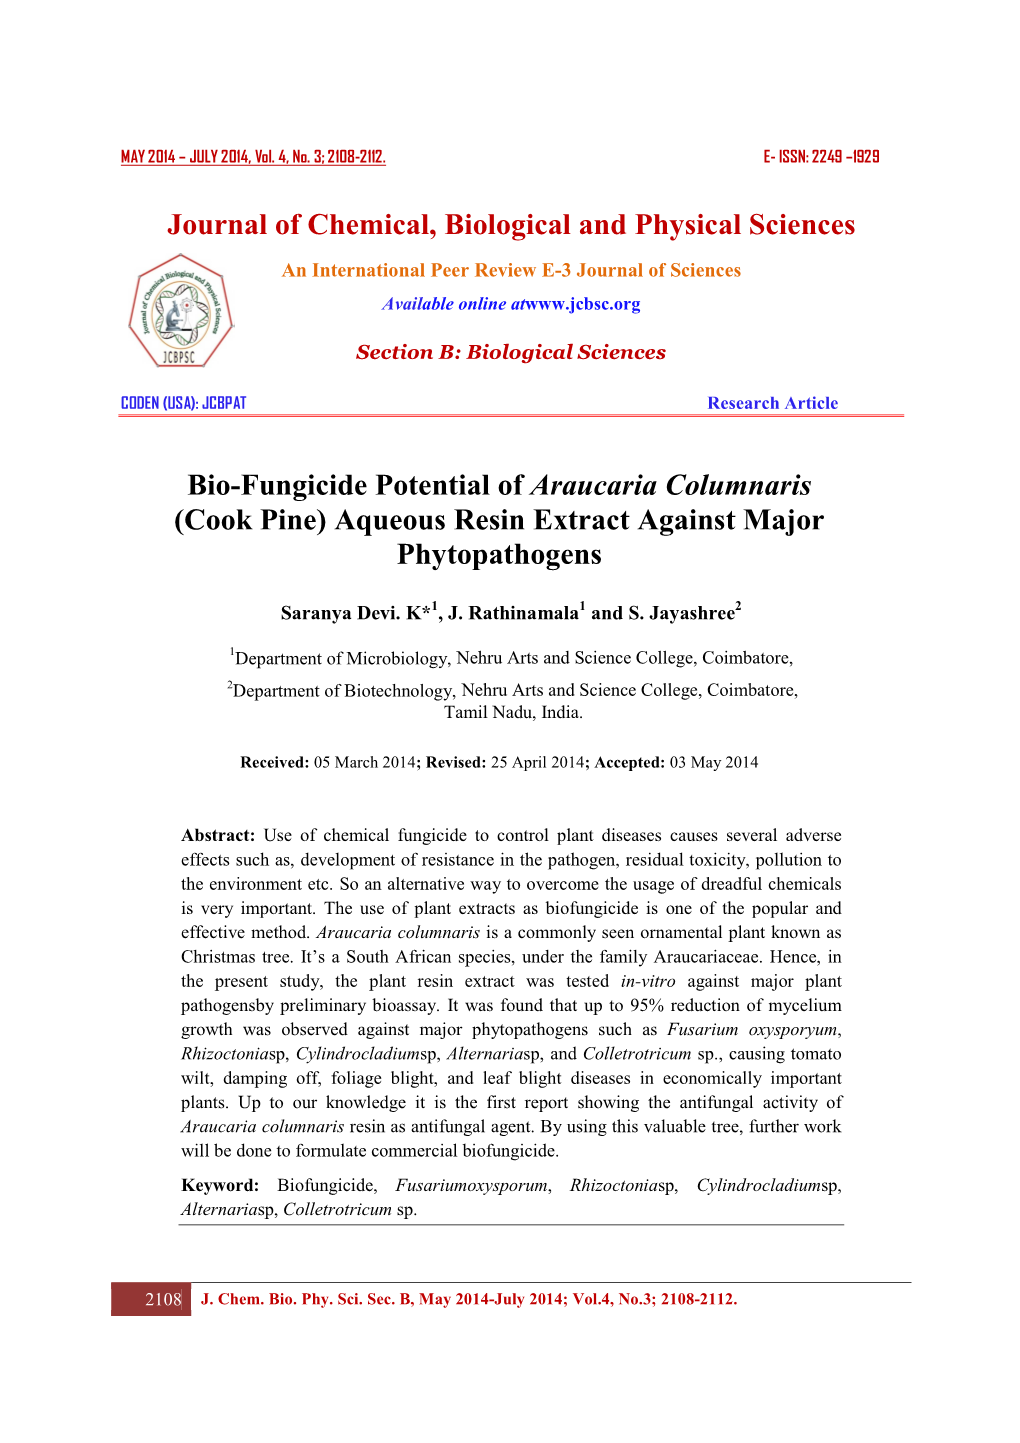 Cook Pine) Aqueous Resin Extract Against Major Phytopathogens